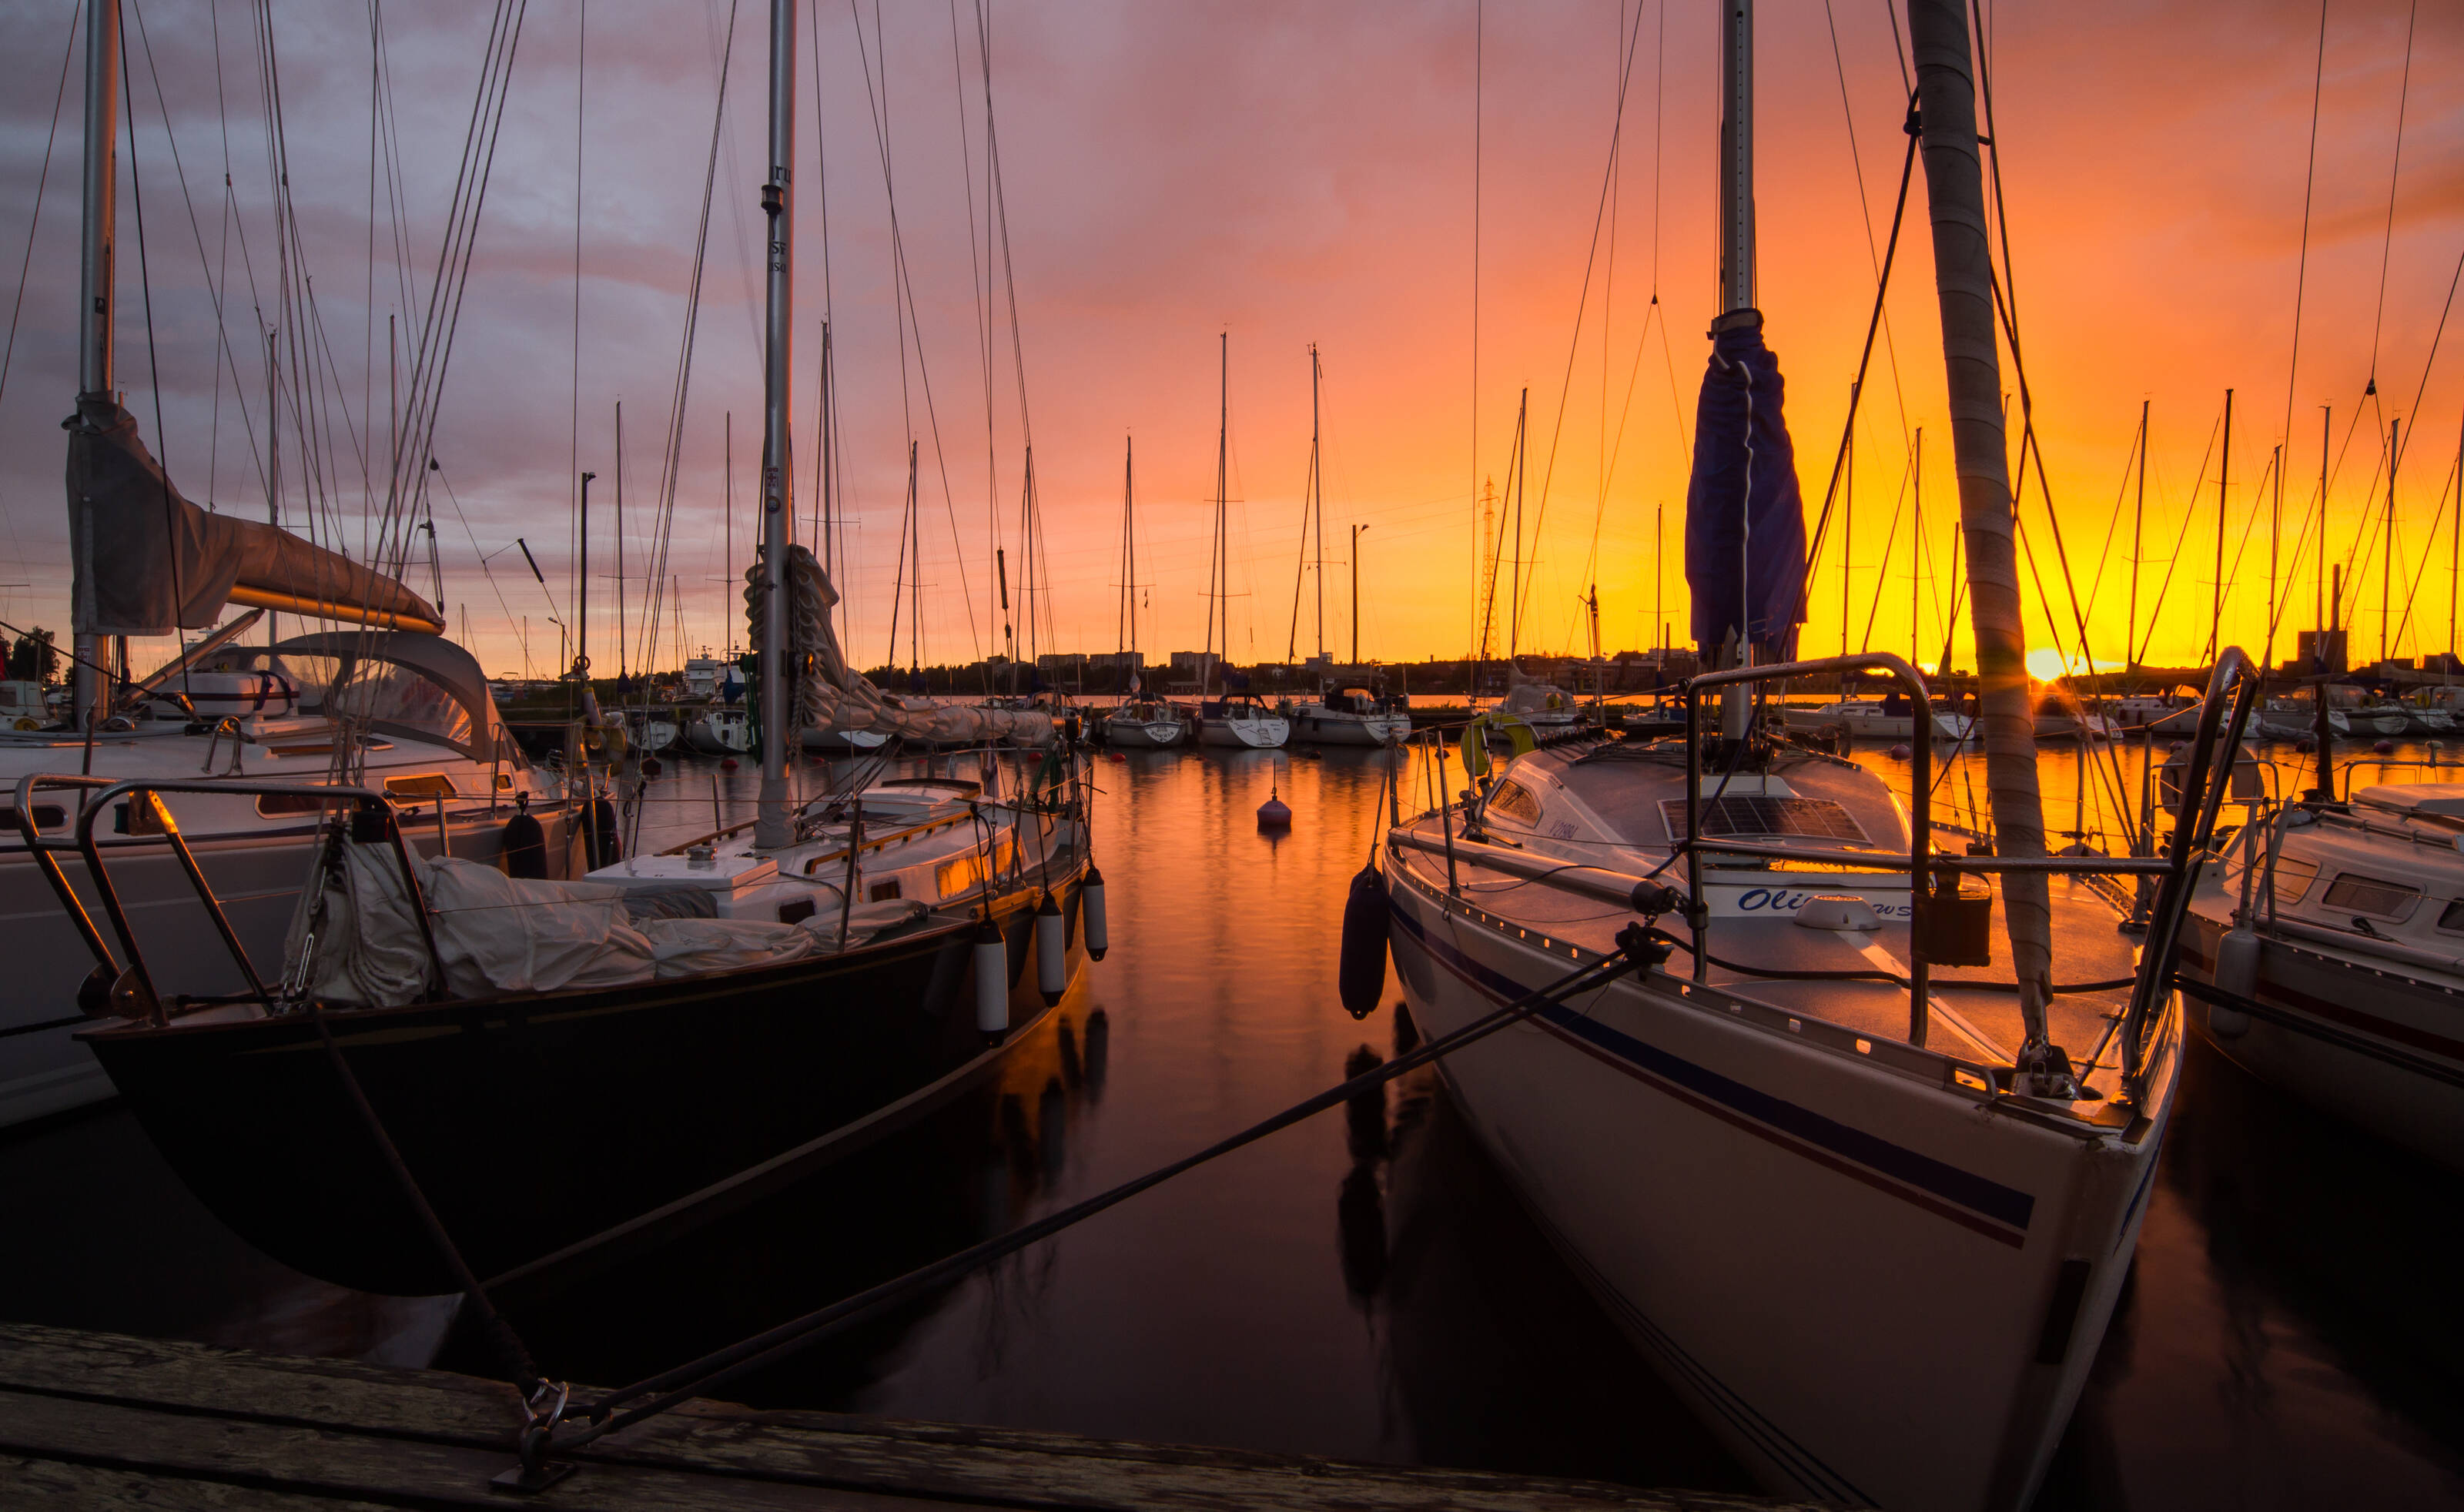 Sailing boats in harbour at sunrise in Vaasa, Finland.